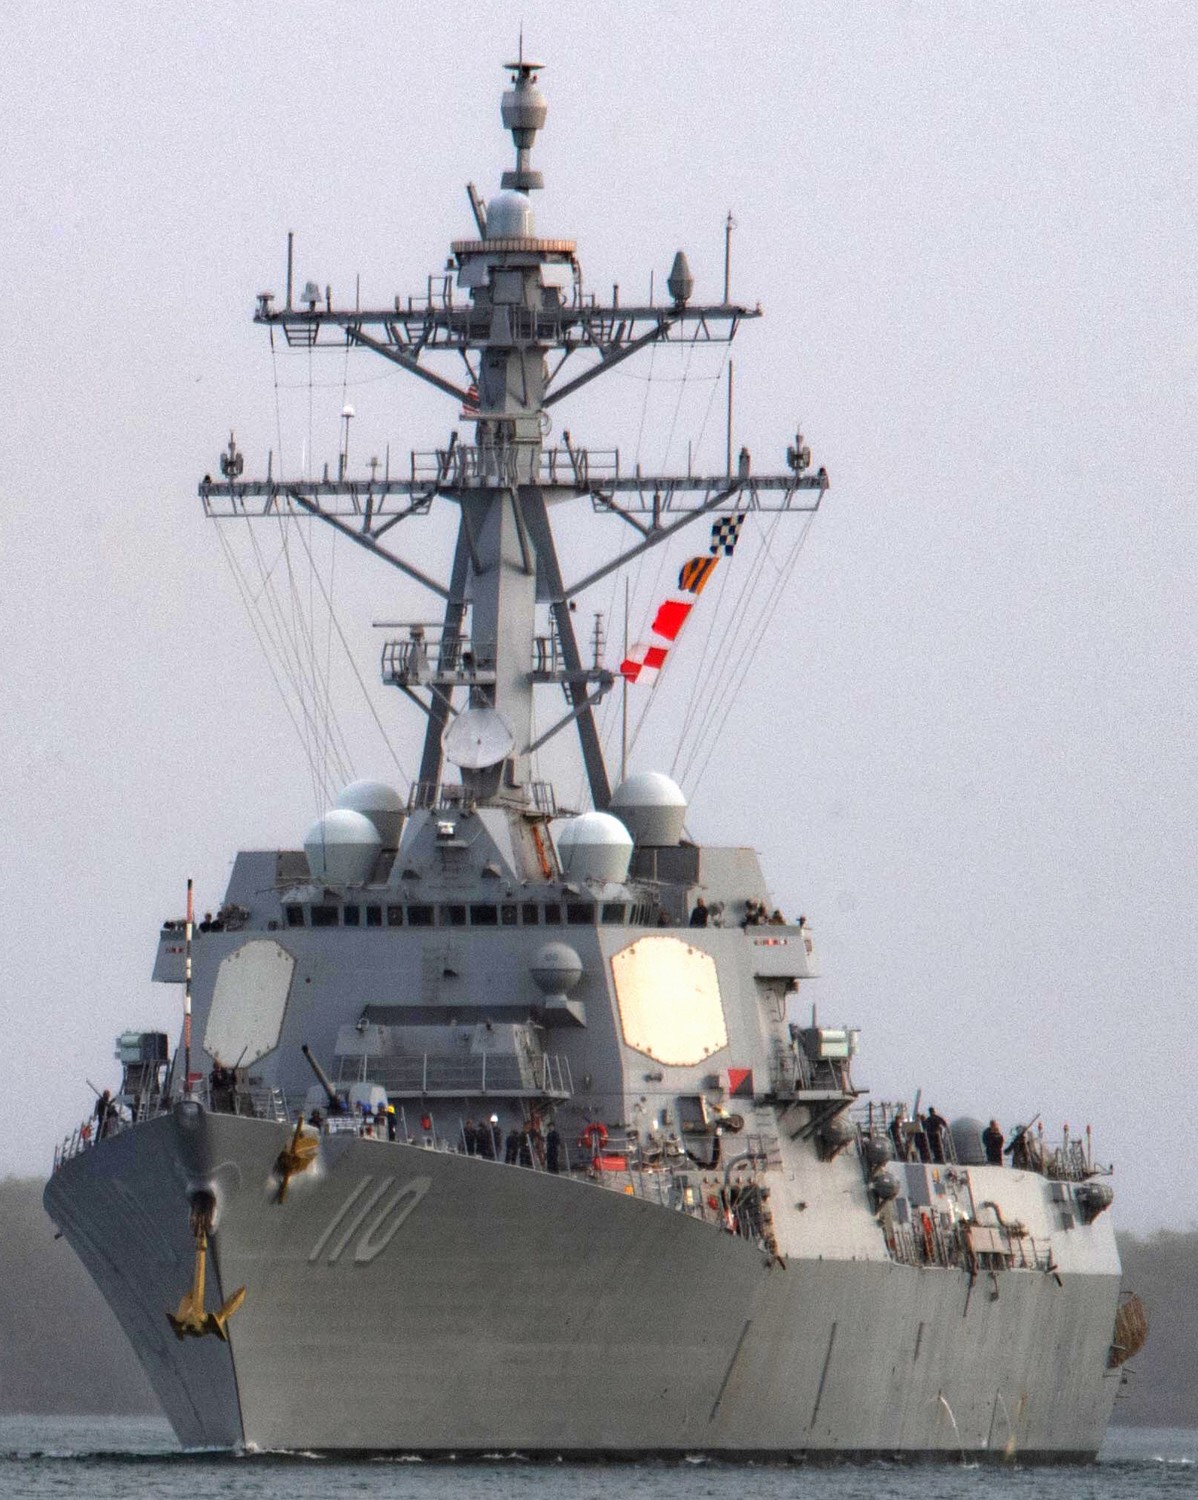 ddg-110 uss william p. lawrence arleigh burke class guided missile destroyer aegis us navy joint base pearl harbor hickam hawaii 83